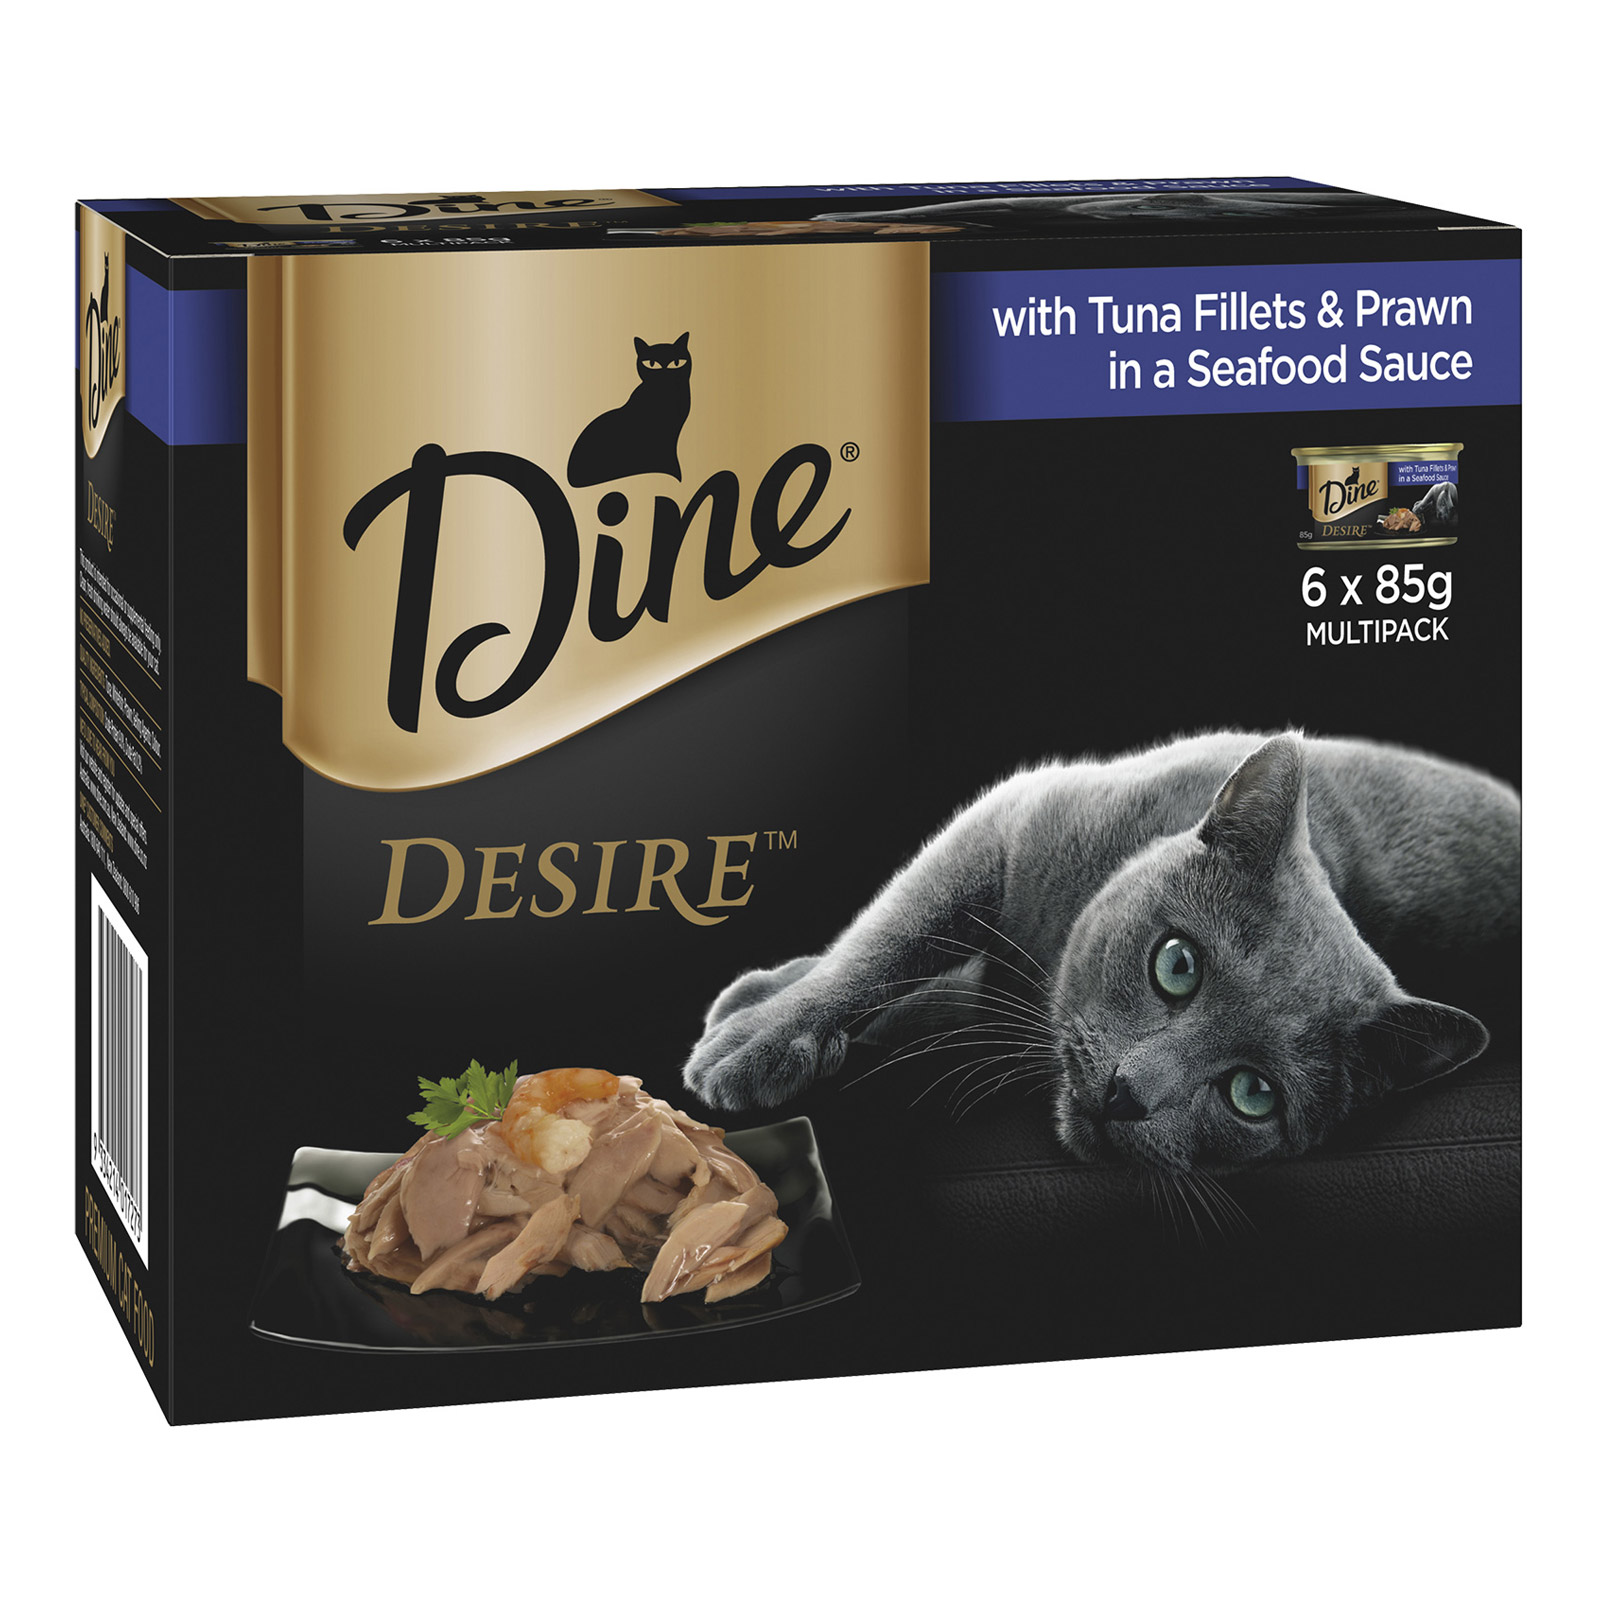 Dine Desire Multipack Adult Cat Wet Canned Food (Tuna Fillets and Prawn in a Seafood Sauce) for Food